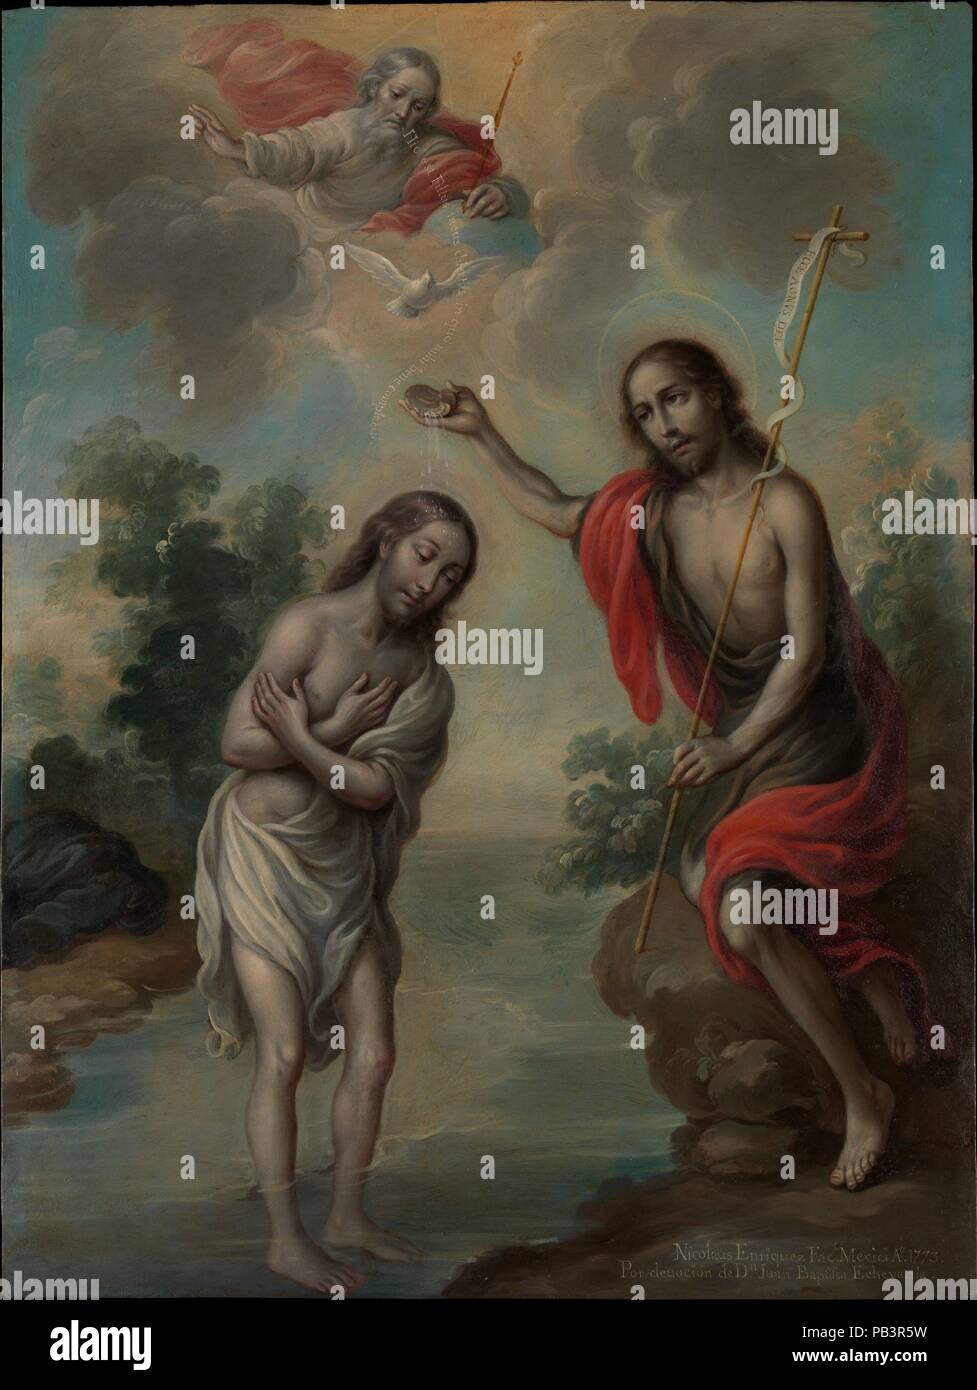 The Baptism of Christ. Artist: Nicolás Enríquez (Mexican, 1704-1790). Dimensions: 22 1/4 × 16 1/2 in. (56.5 × 41.9 cm)  Framed: 25 1/4 × 19 3/4 × 1 1/2 in. (64.1 × 50.2 × 3.8 cm). Date: 1773.  In 1773 Nicolás Enríquez created a set of five paintings (see 2014.171-.175) for the private devotional use of Juan Bautista Echeverría, a Spanish-born merchant.  Echeverría's choice of subject matter is highly personal, reflecting both his Basque roots and his extended residence in Mexico. Enríquez lavished special attention on the painting of Echeverría's namesake, St. John the Baptist. The painter too Stock Photo